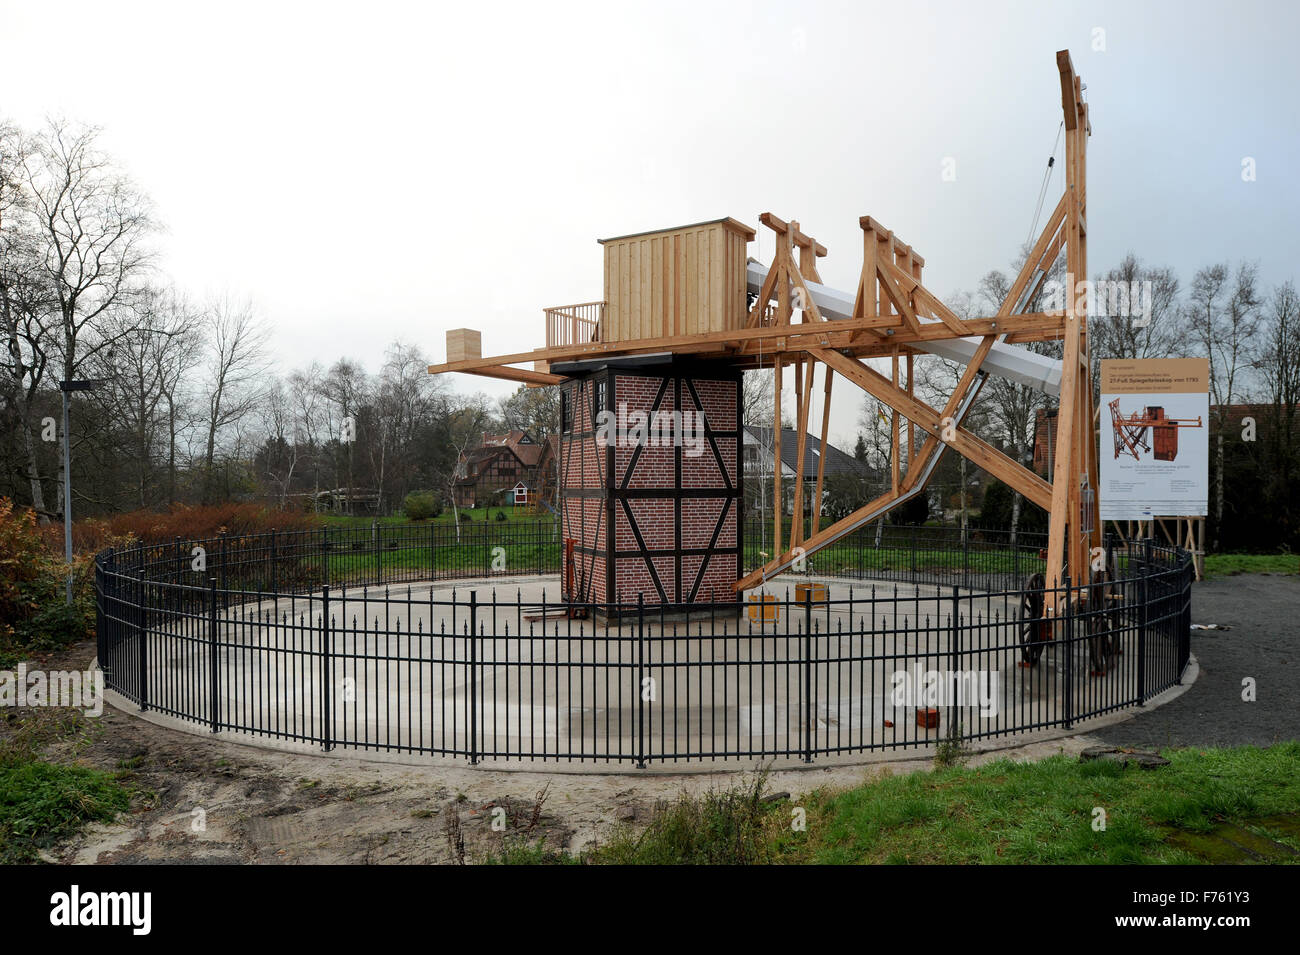 Lilienthal, Germany. 25th Nov, 2015. The Telescopium, a replica of an observatory from the 18th century, close to completion in Lilienthal, Germany, 25 November 2015. The observatory is scheduled to open on 28 November 2015. Photo: INGO WAGNER/dpa/Alamy Live News Stock Photo